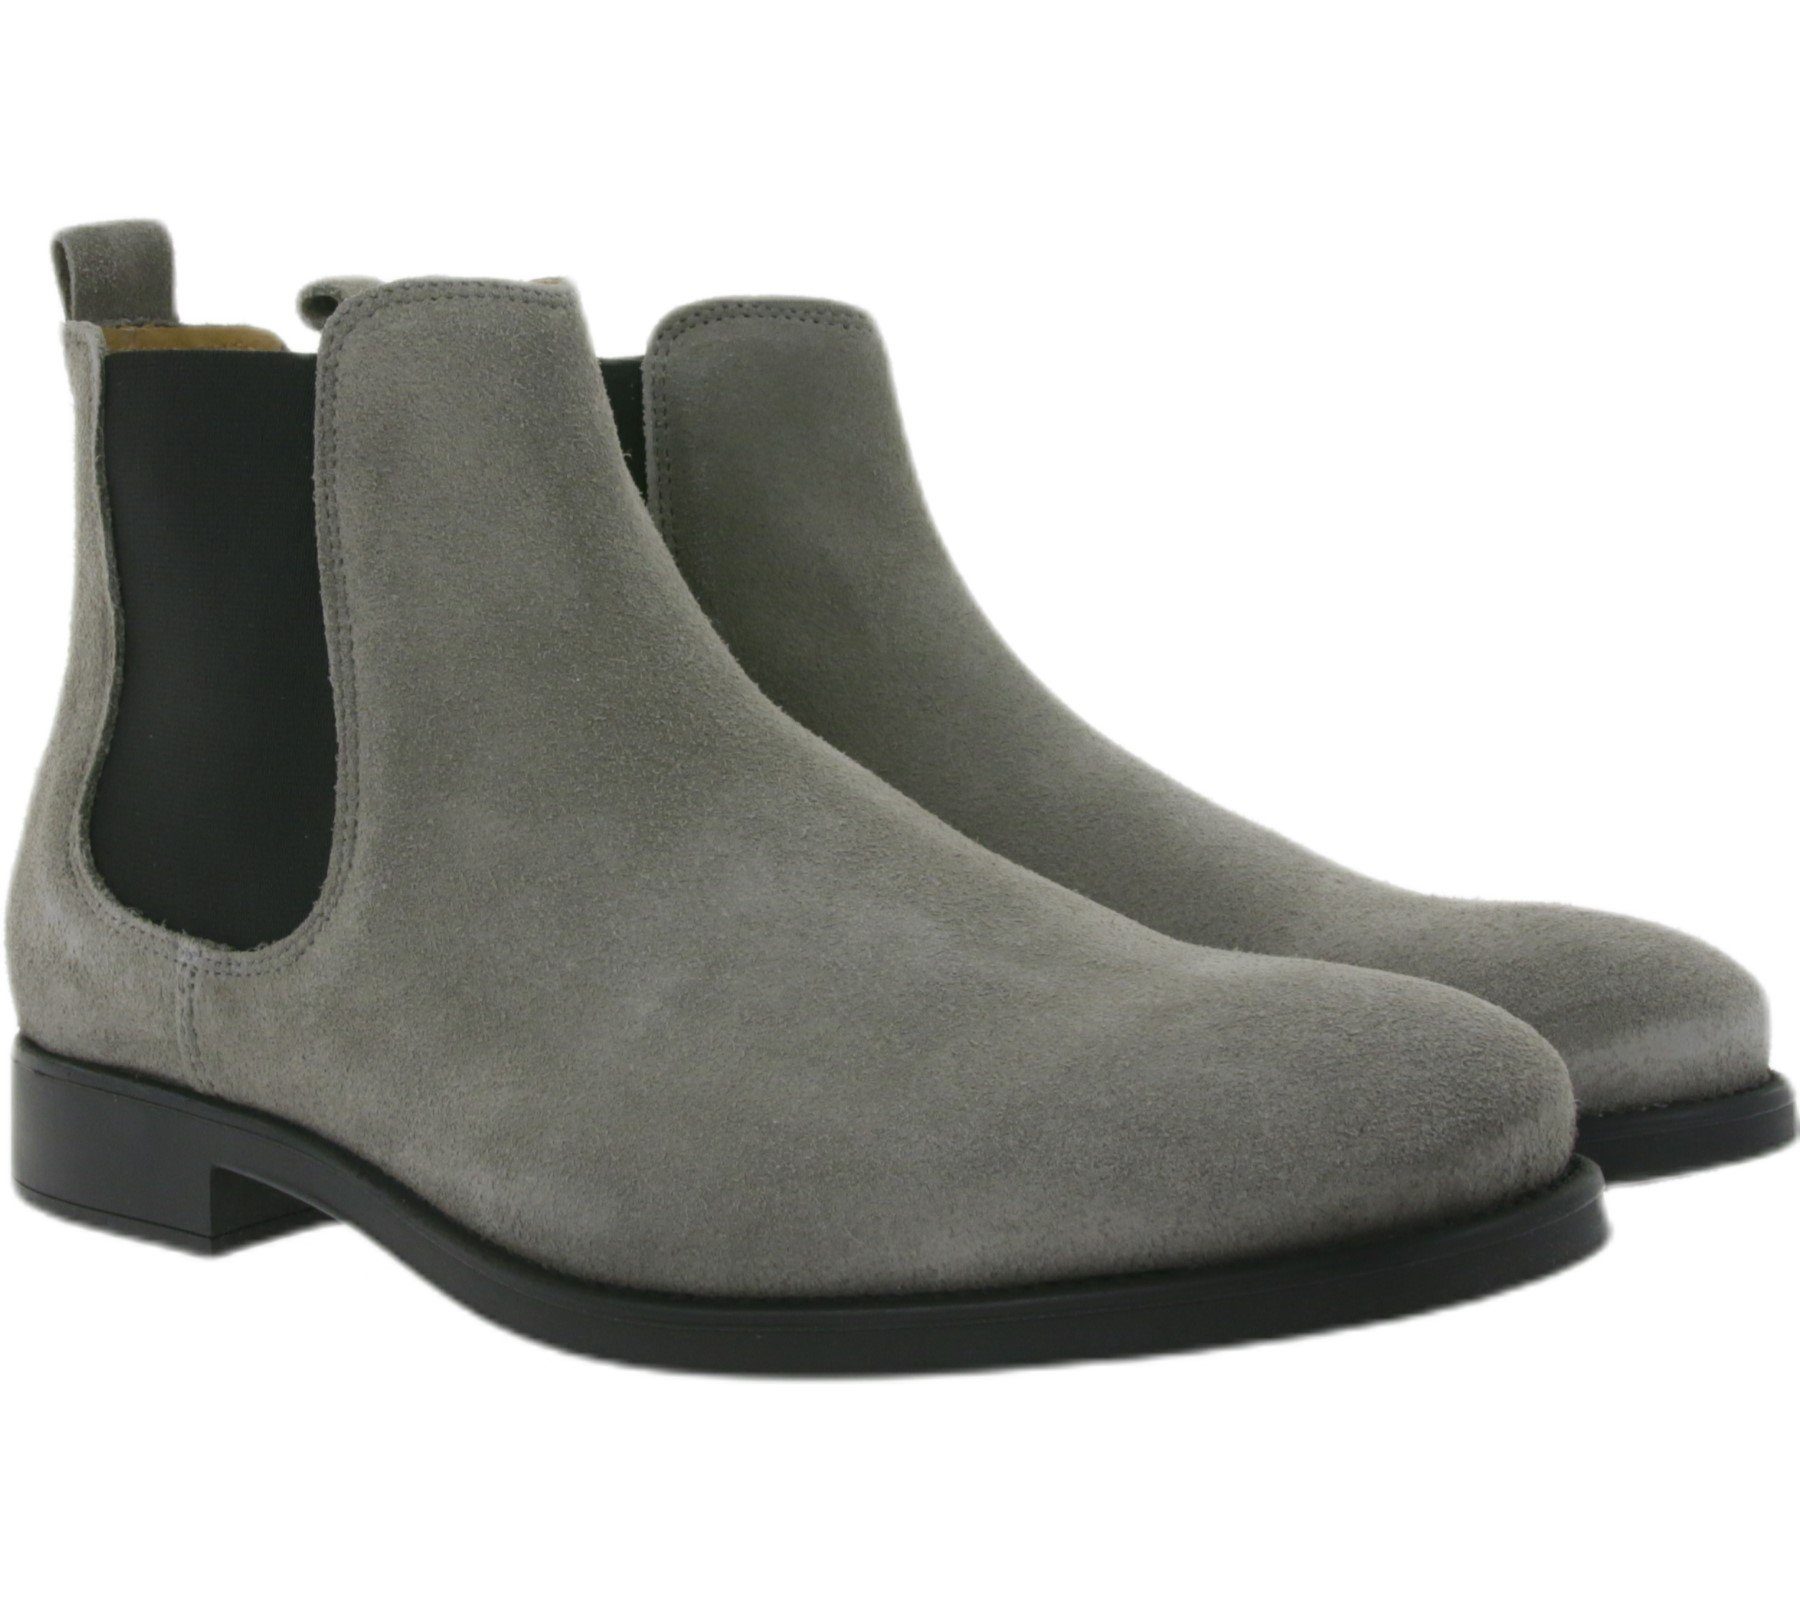 SELECTED HOMME »SELECTED HOMME Herren Chelsea-Boots Stiefelette Oliver New  Süde Winter-Schuhe Grau« Chelseaboots online kaufen | OTTO